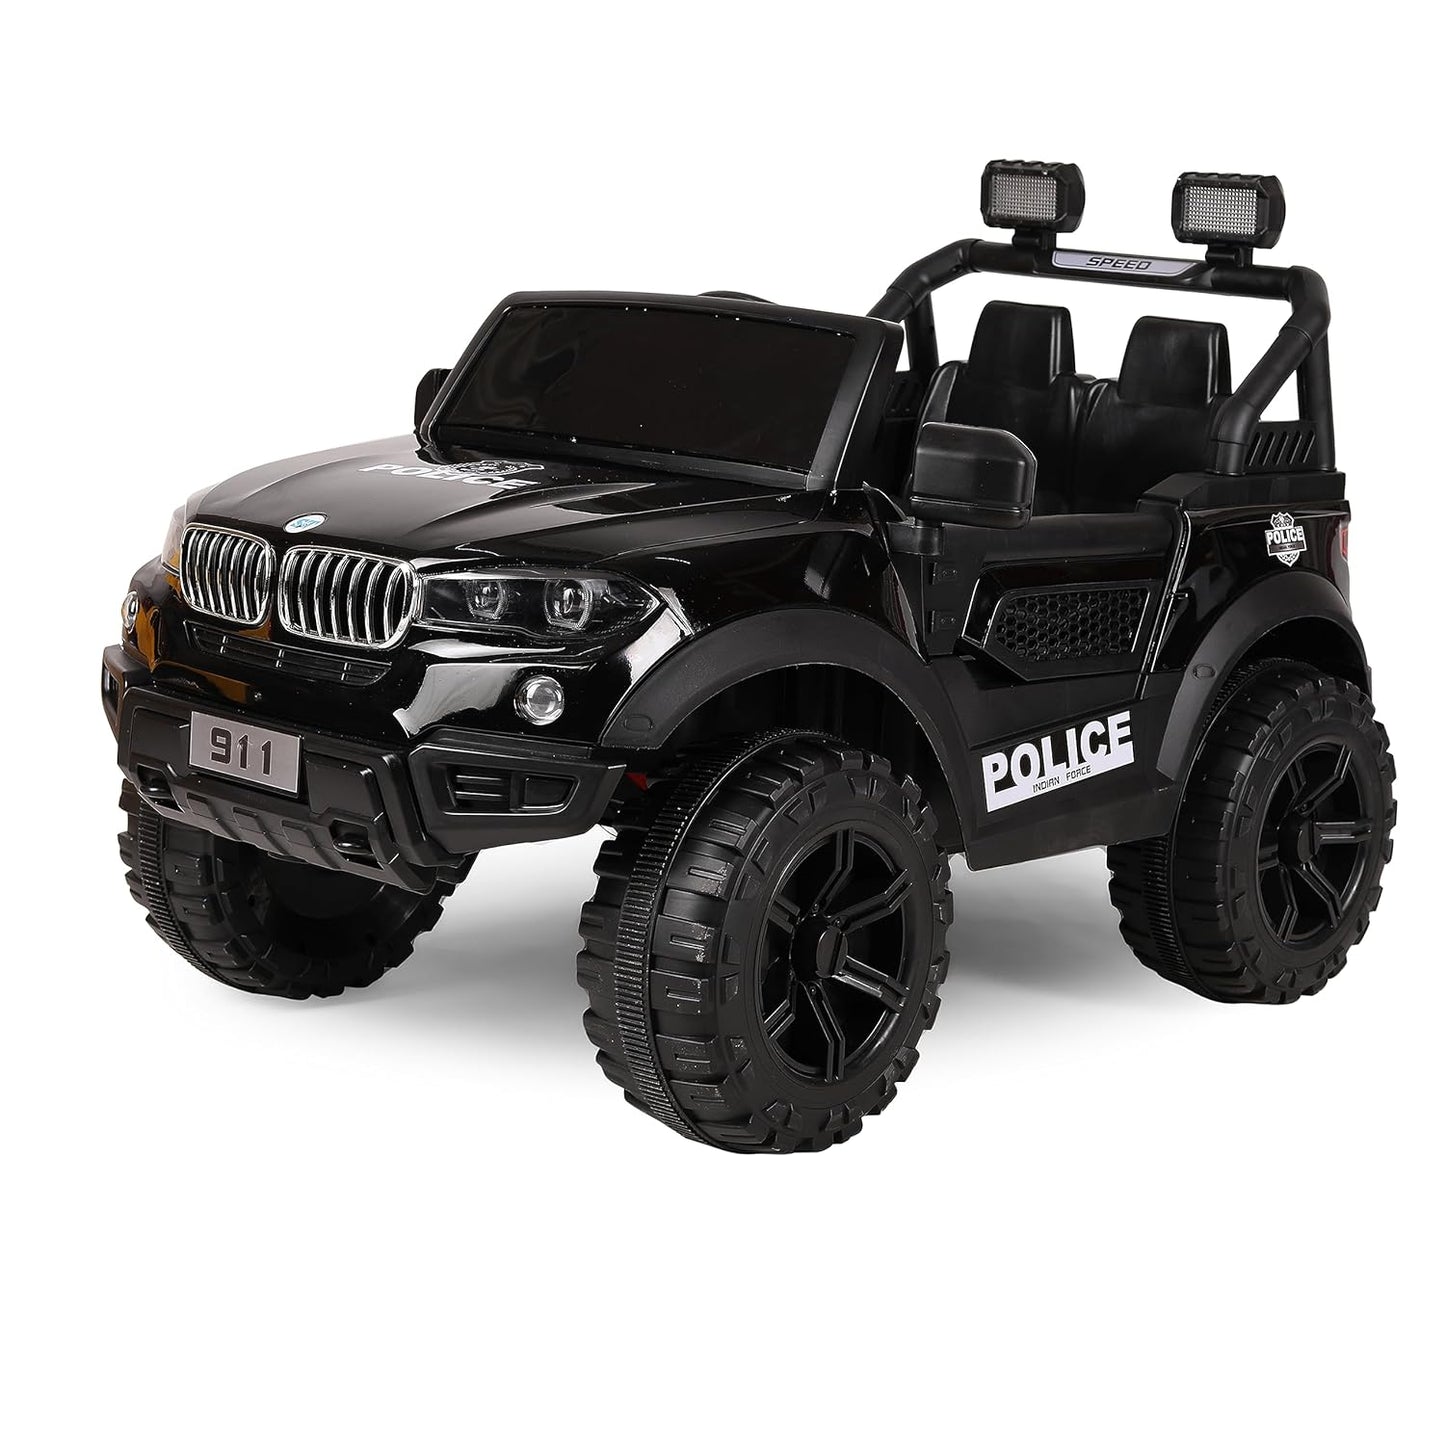 GettBoles Electric Battery Operated Ride on Jeep for Kids of Age 2 to 6 Years- The Metallic Painted Driving Ride on Car with Music, Lights and Bluetooth Remote Control (Black)